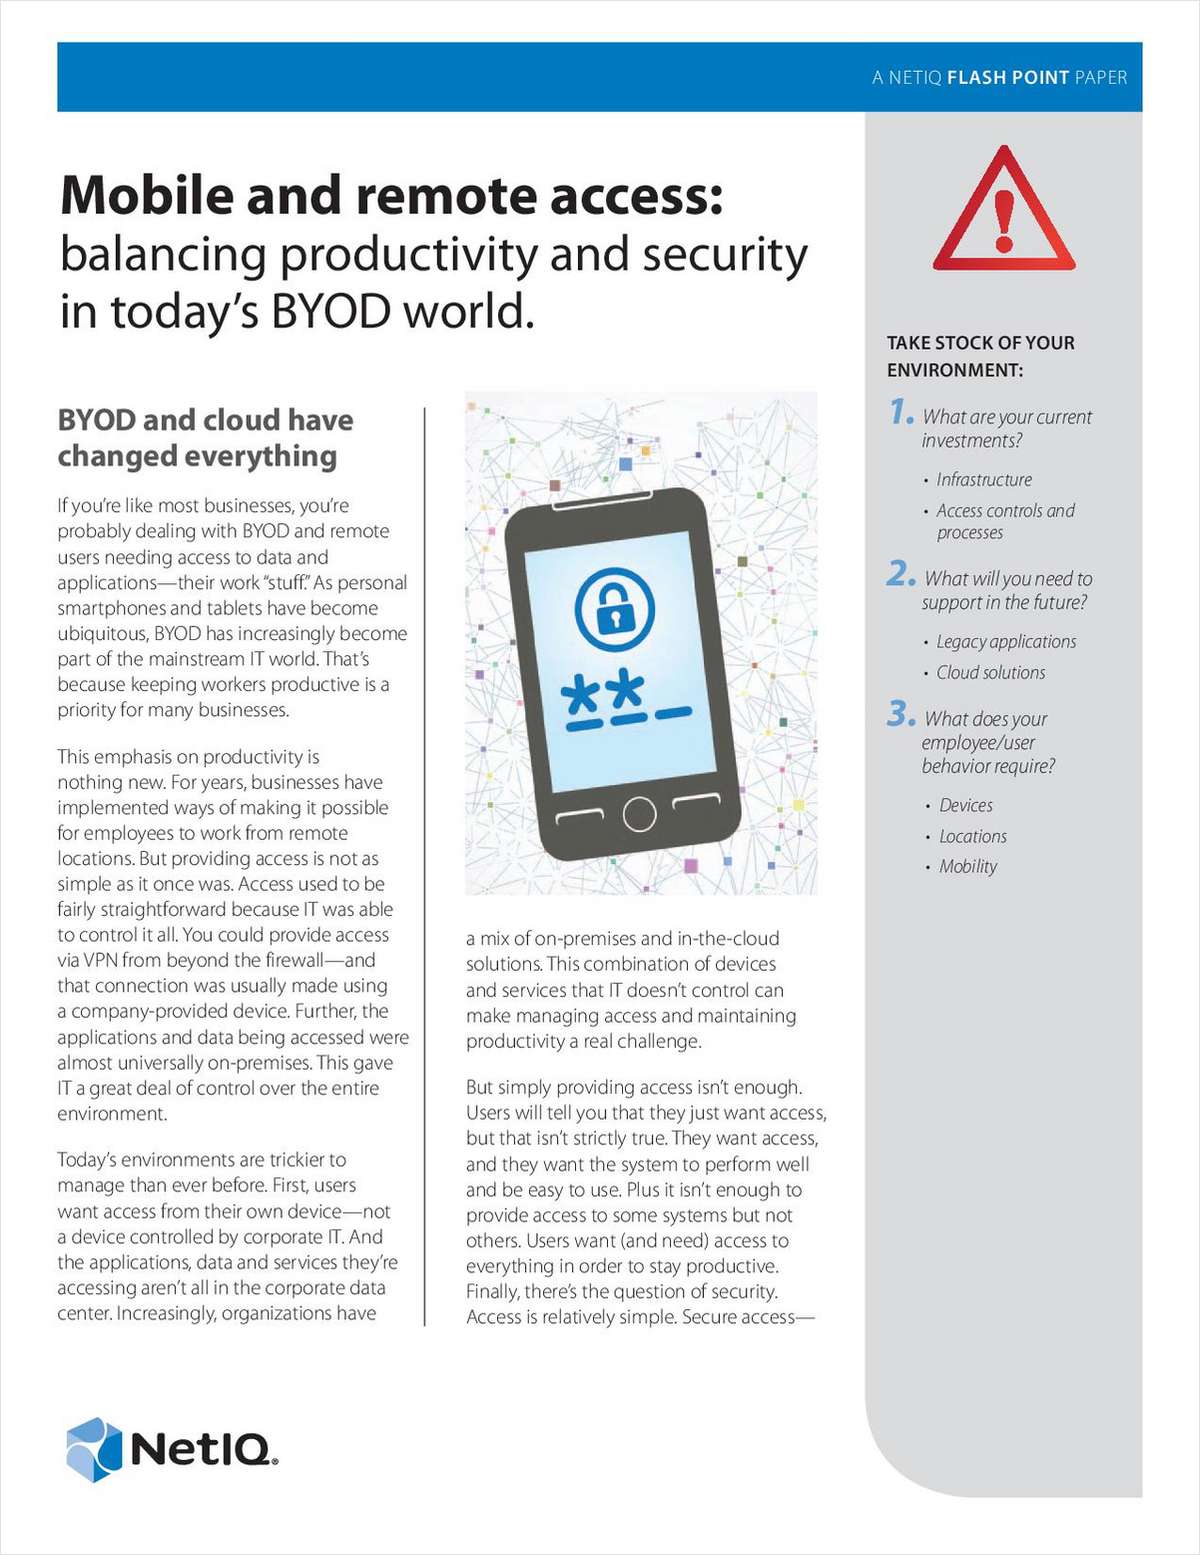 Mobile and Remote Access: Balancing Convenience and Security